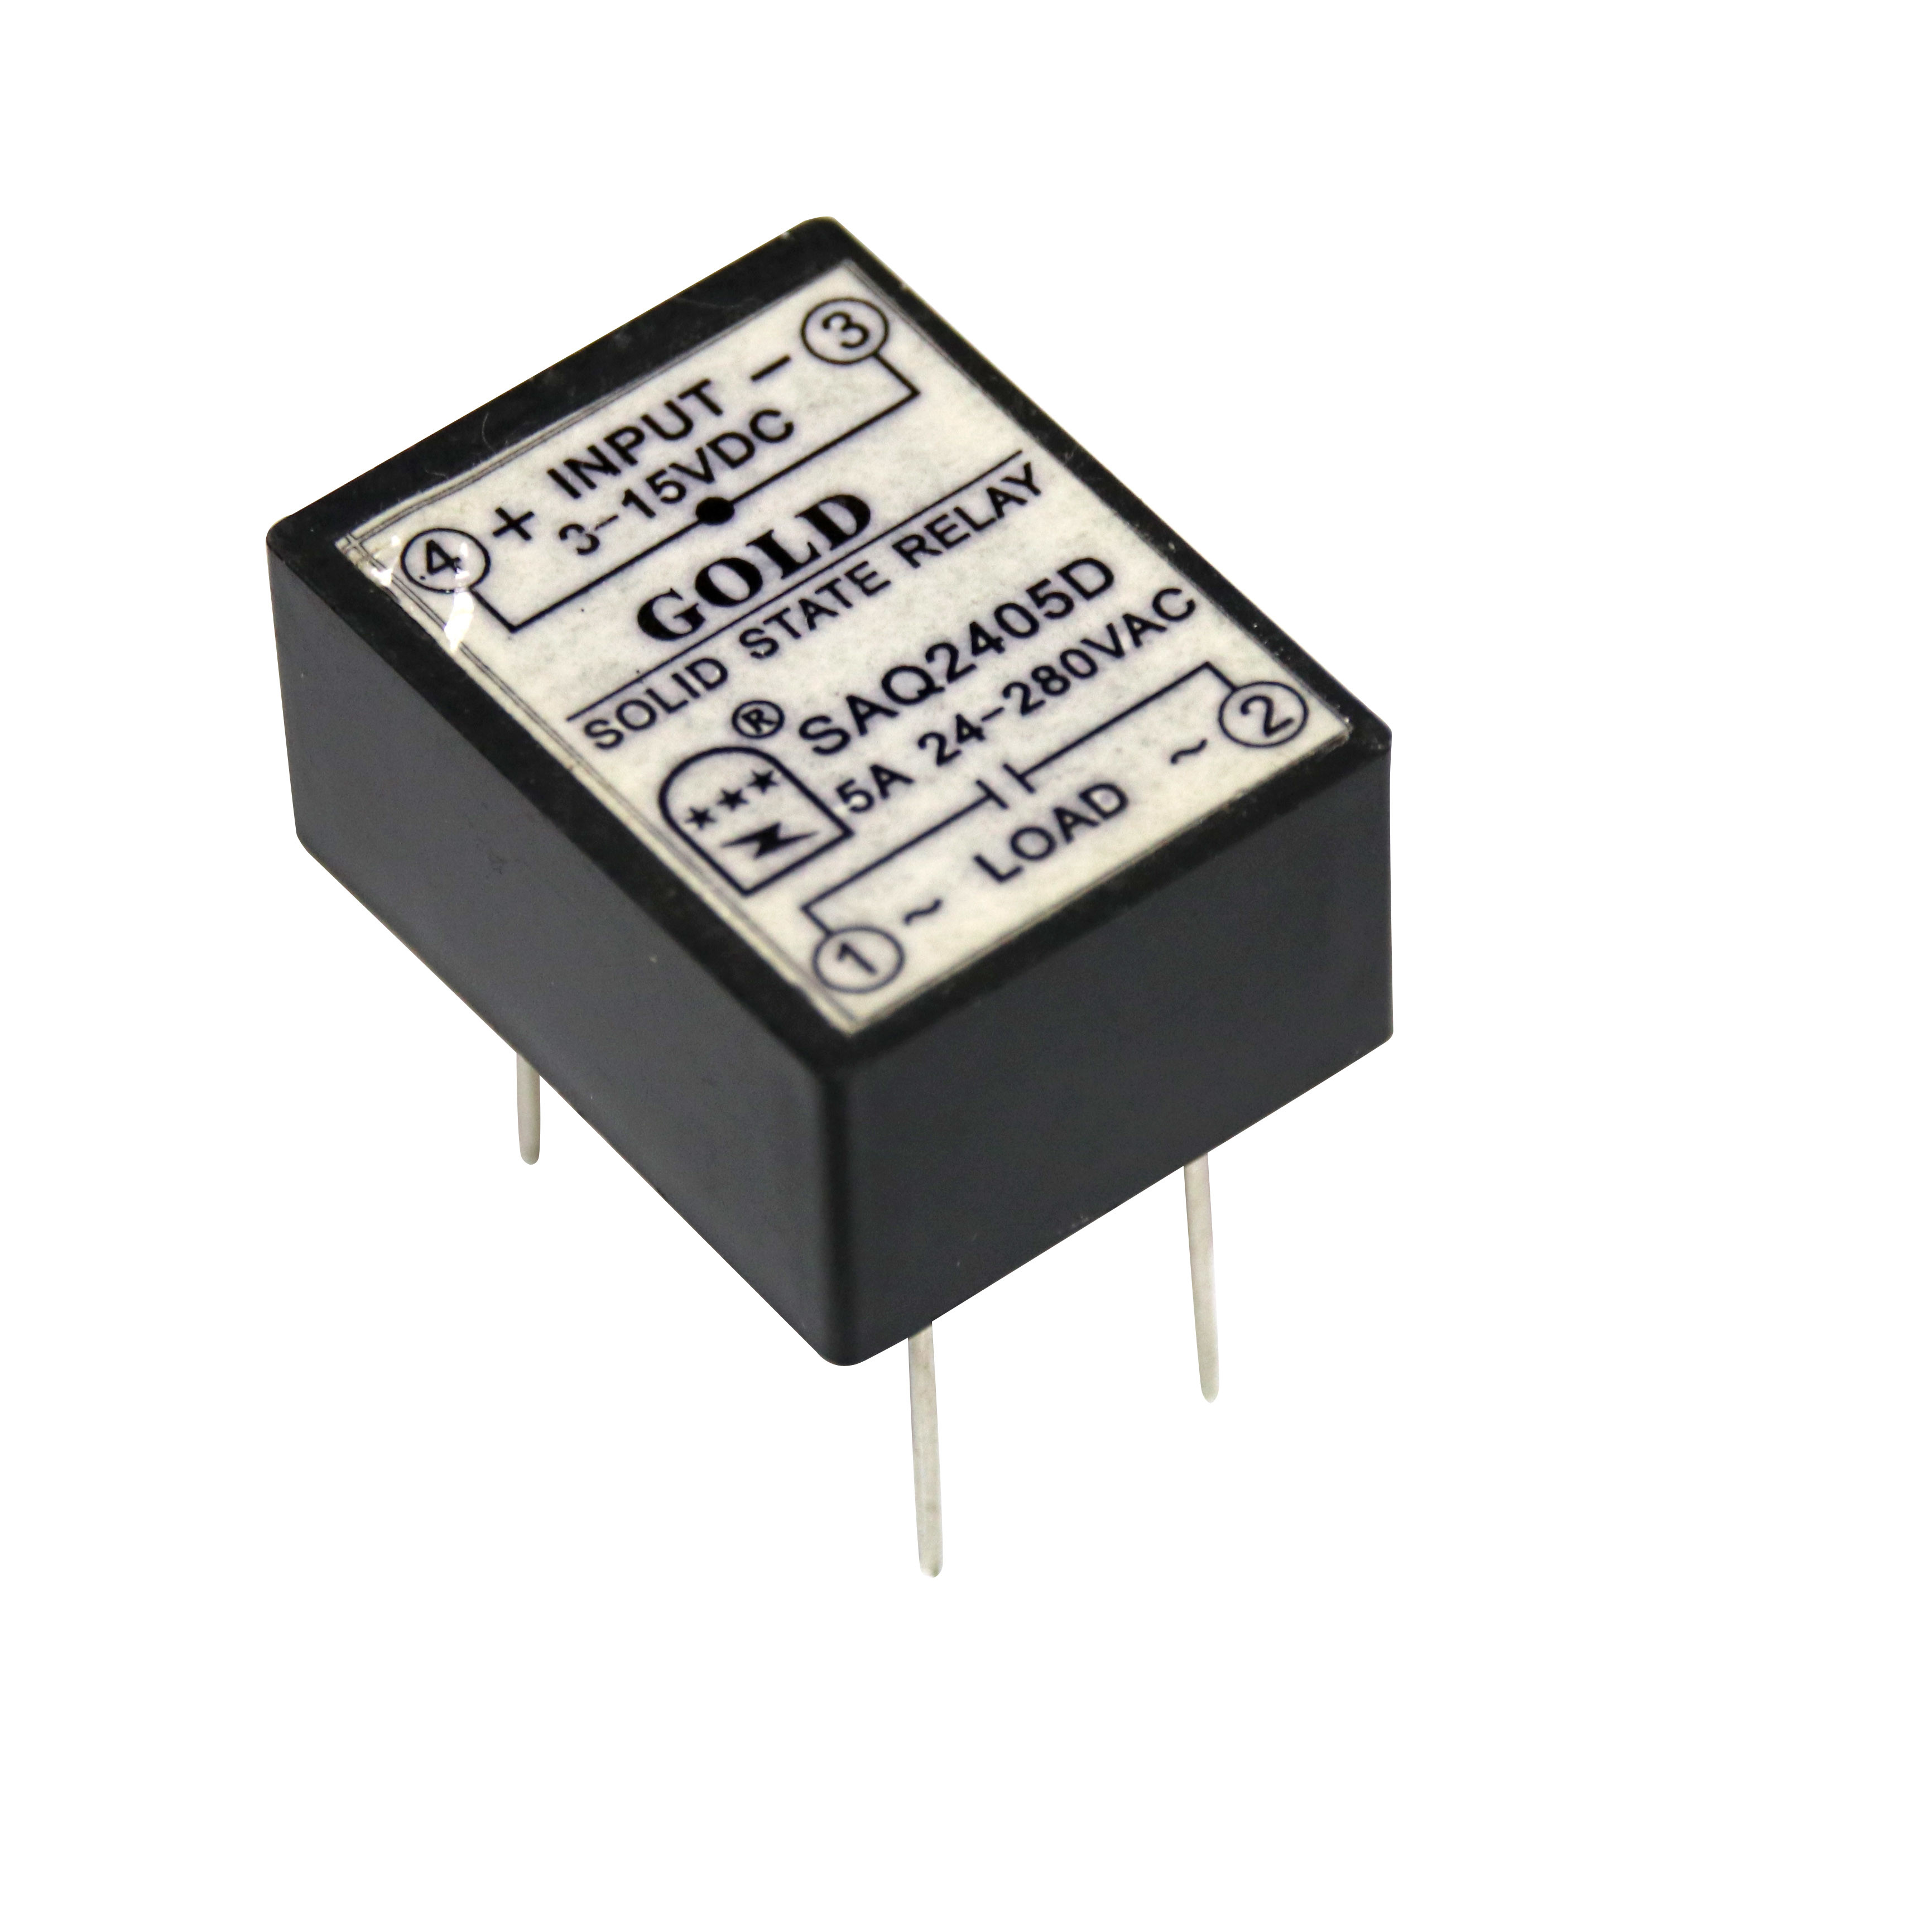 Quality Low Voltage Scr 3v 50 Amp SSR Solid State Relay for sale